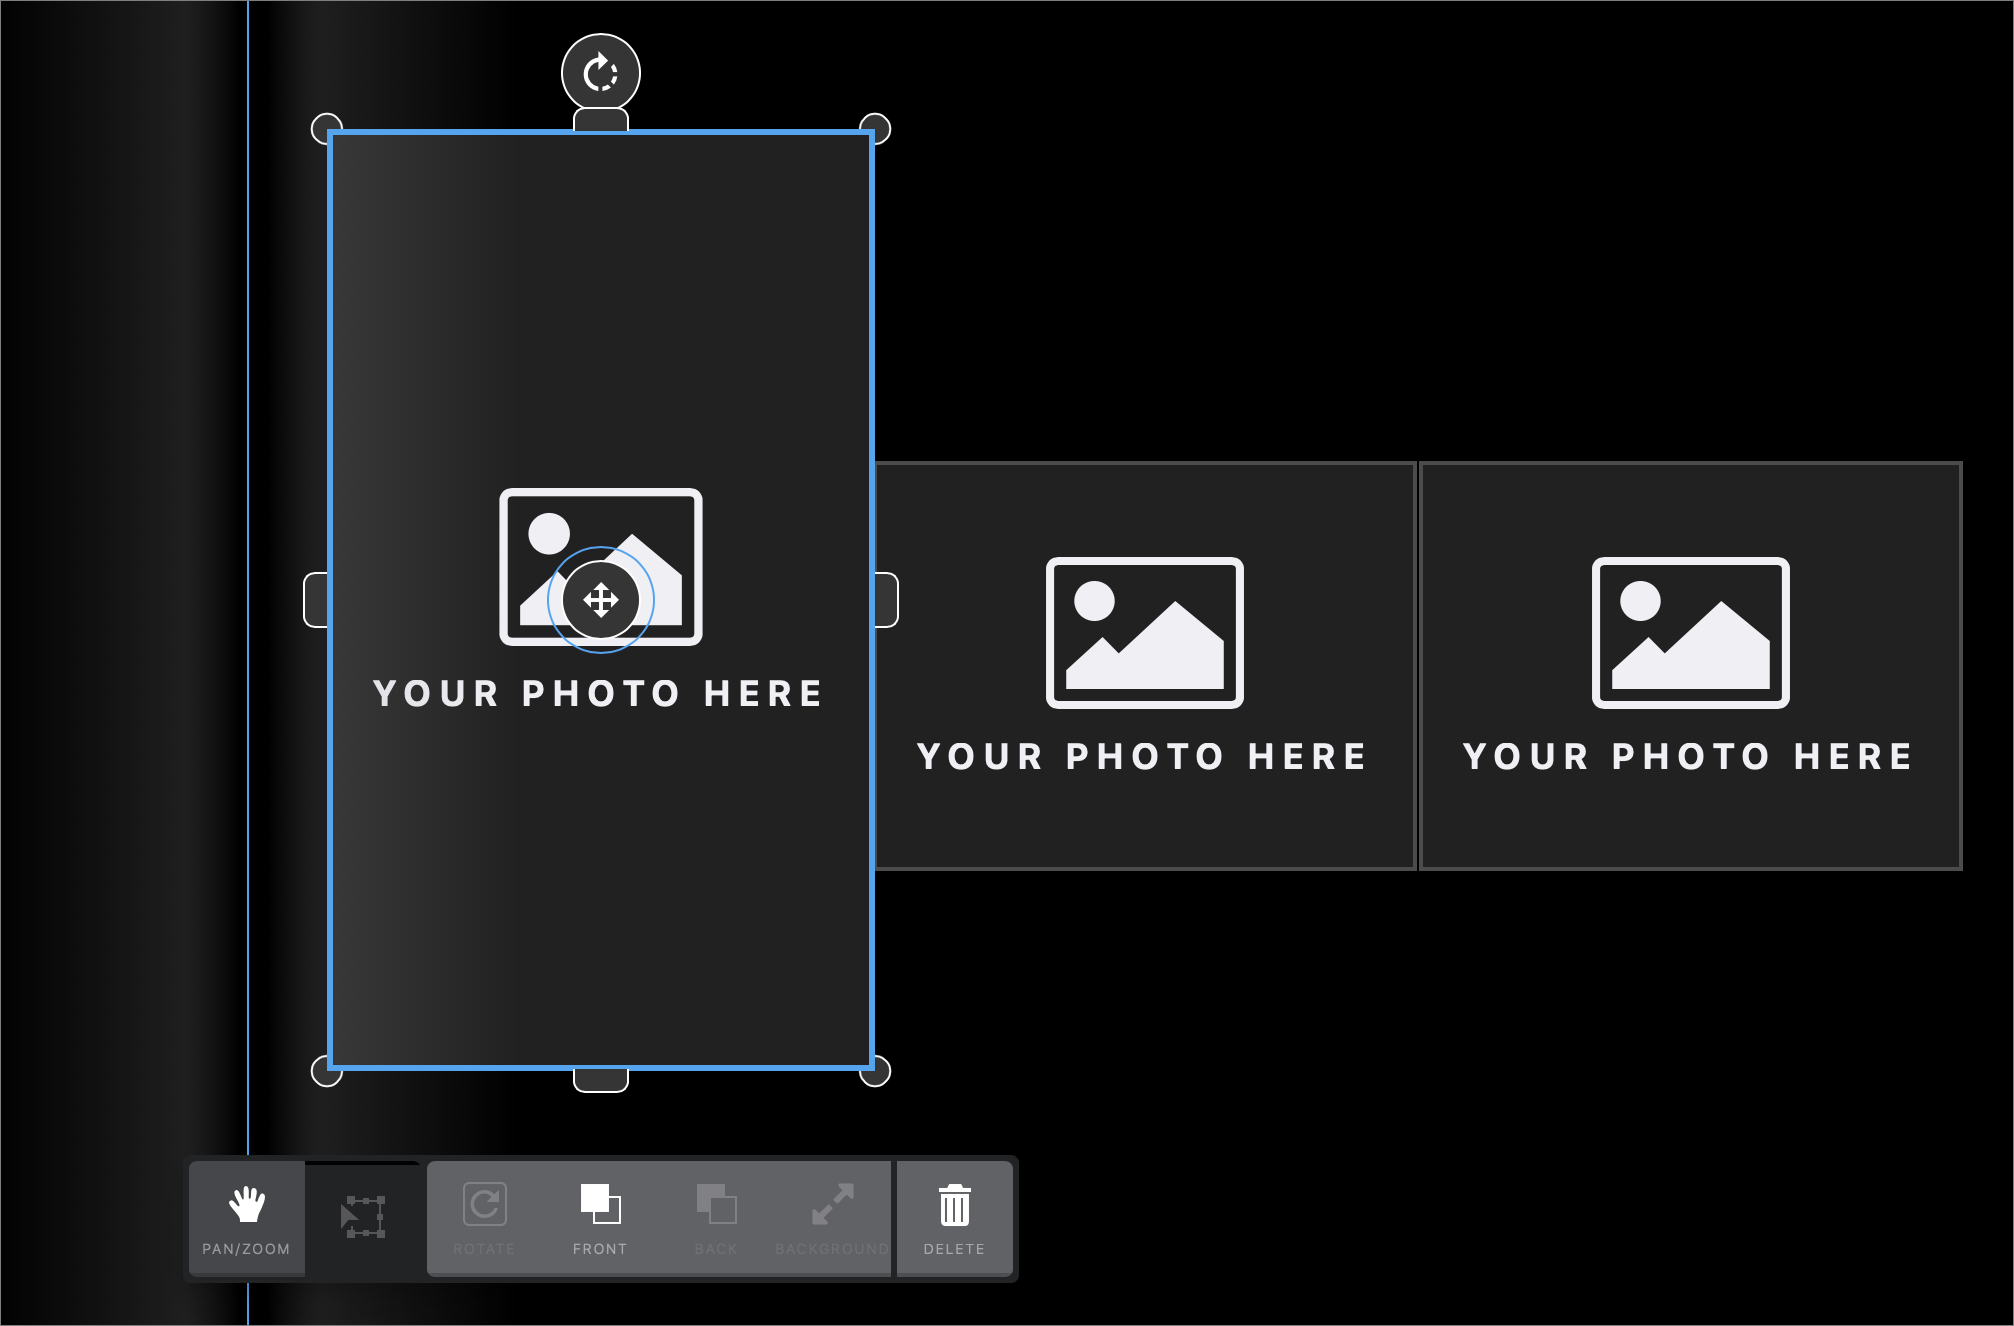 Figure 111: Mimeo lets you add and remove photo boxes as well as change their sizes, so you can design every page with any layout you can imagine.